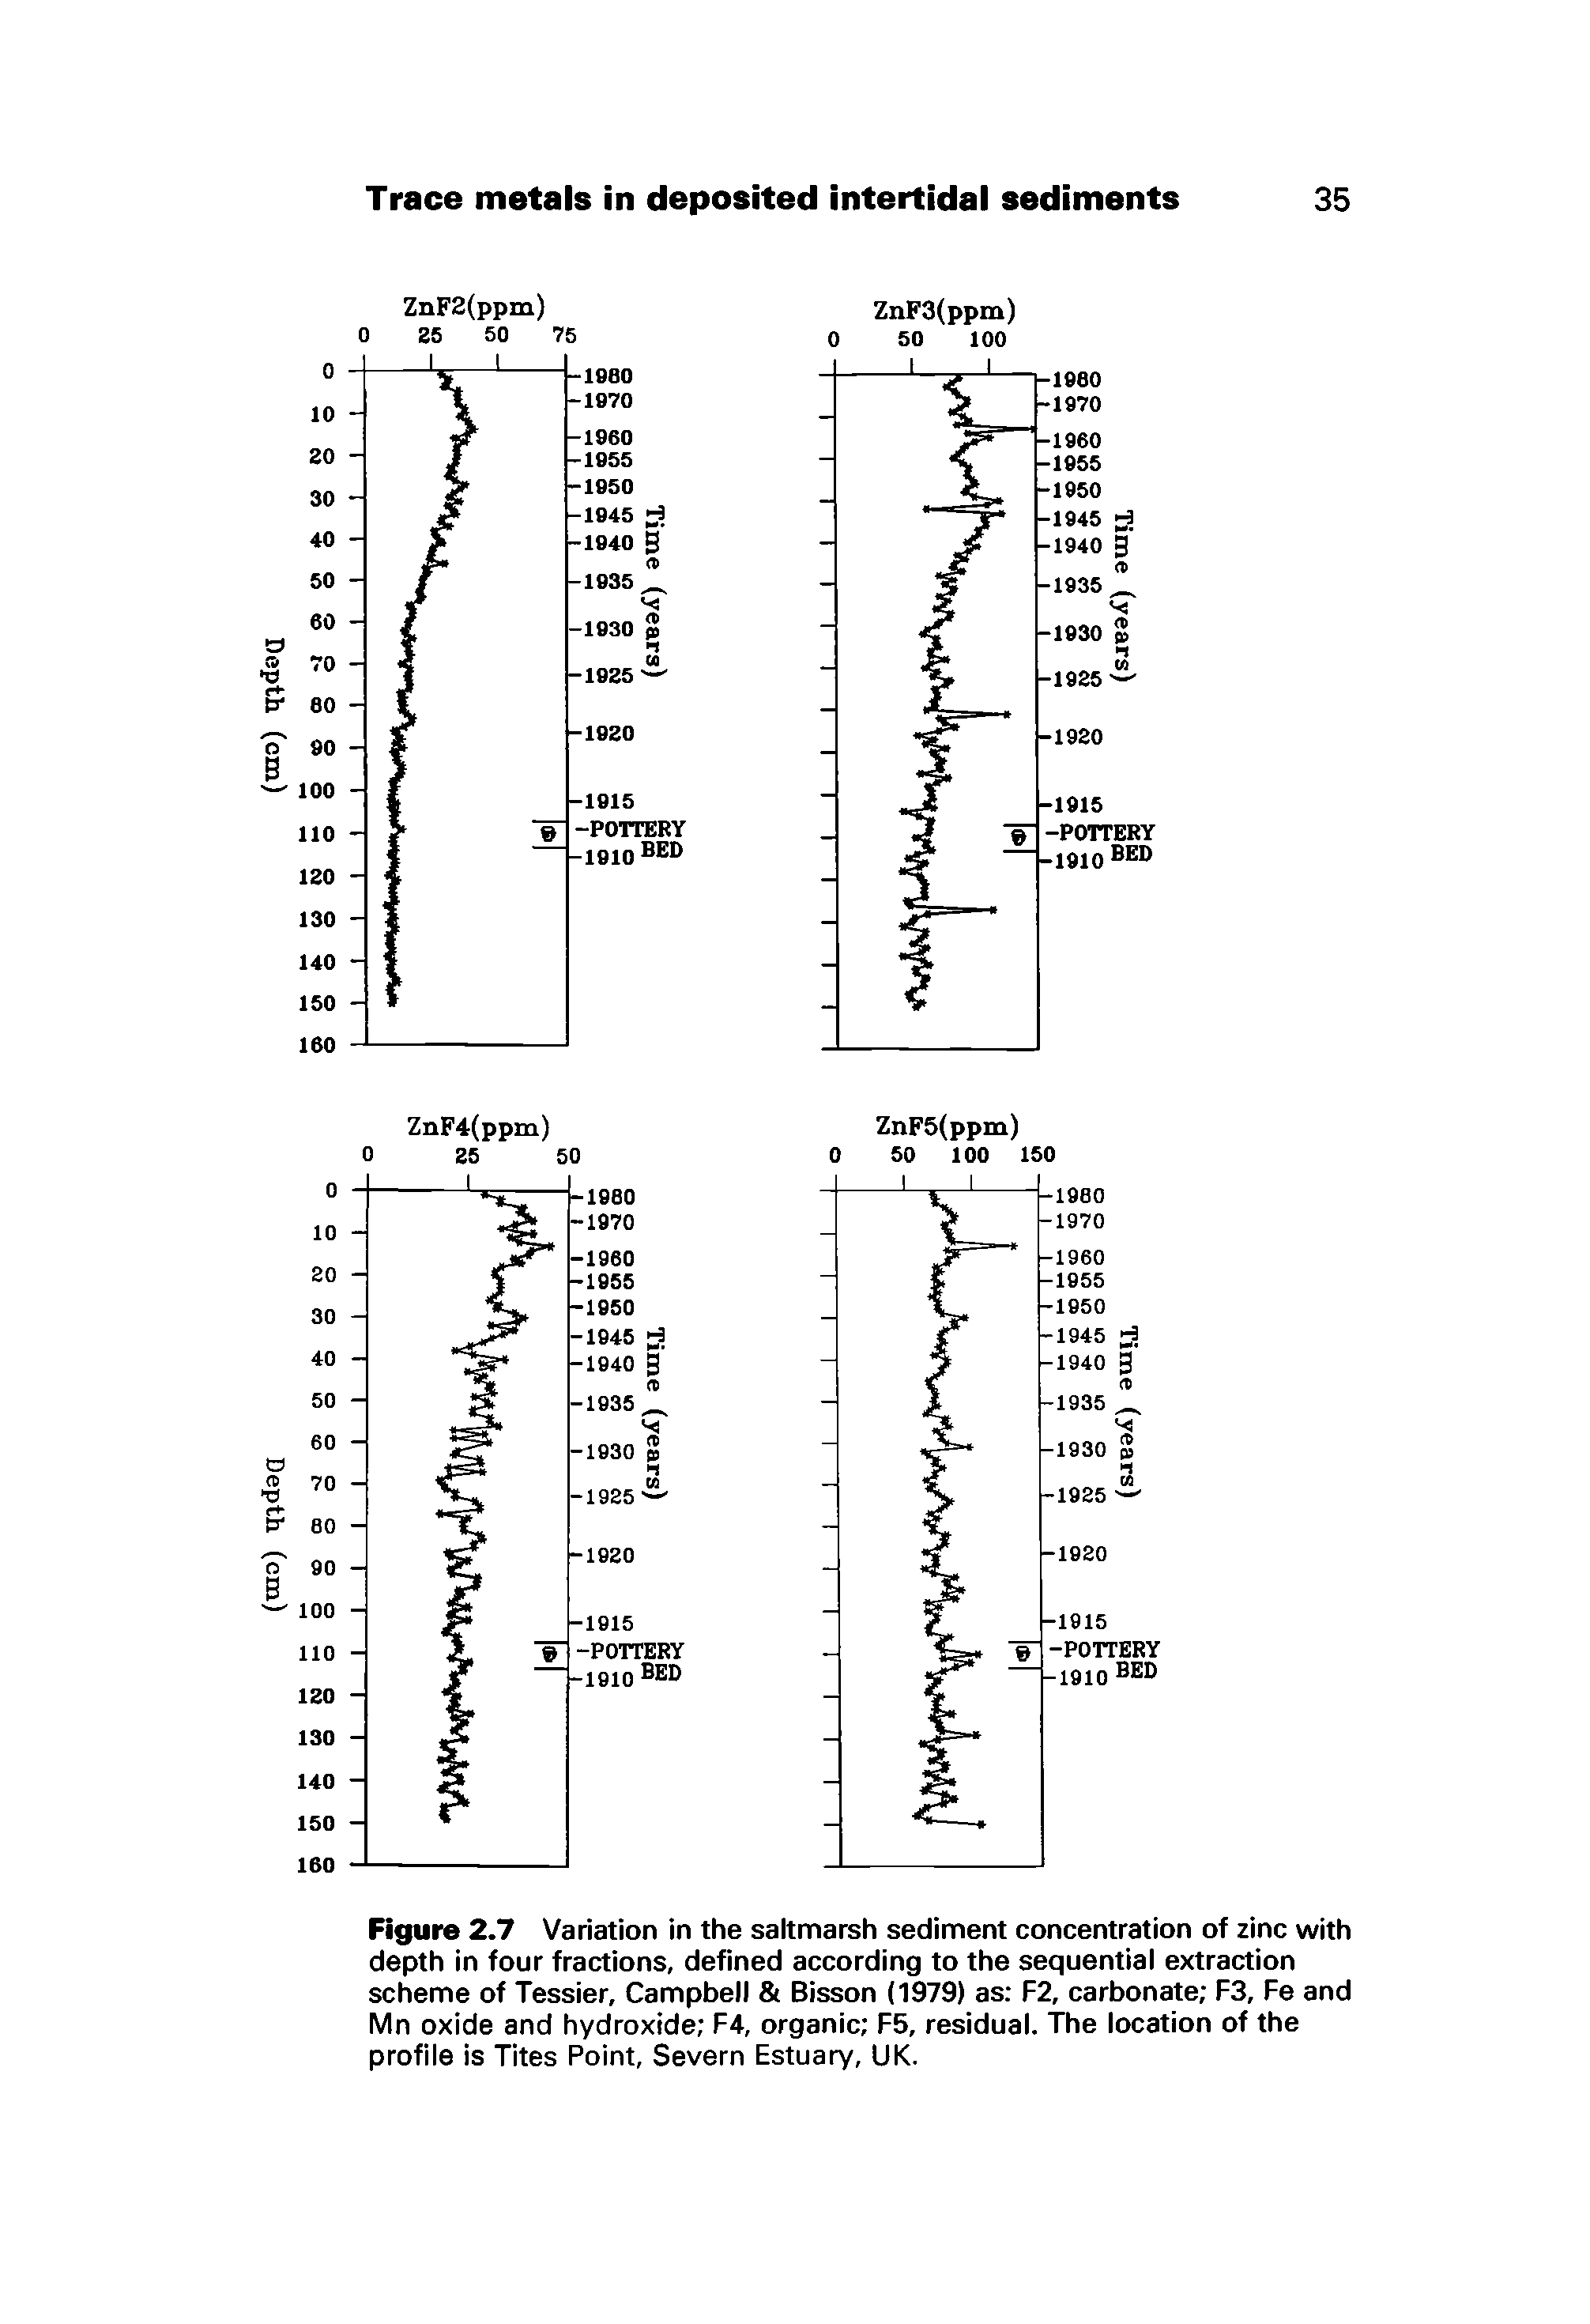 Figure 2.7 Variation in the saltmarsh sediment concentration of zinc with depth in four fractions, defined according to the sequential extraction scheme of Tessier, Campbell Bisson (1979) as F2, carbonate F3, Fe and Mn oxide and hydroxide F4, organic F5, residual. The location of the profile is Tites Point, Severn Estuary, UK.